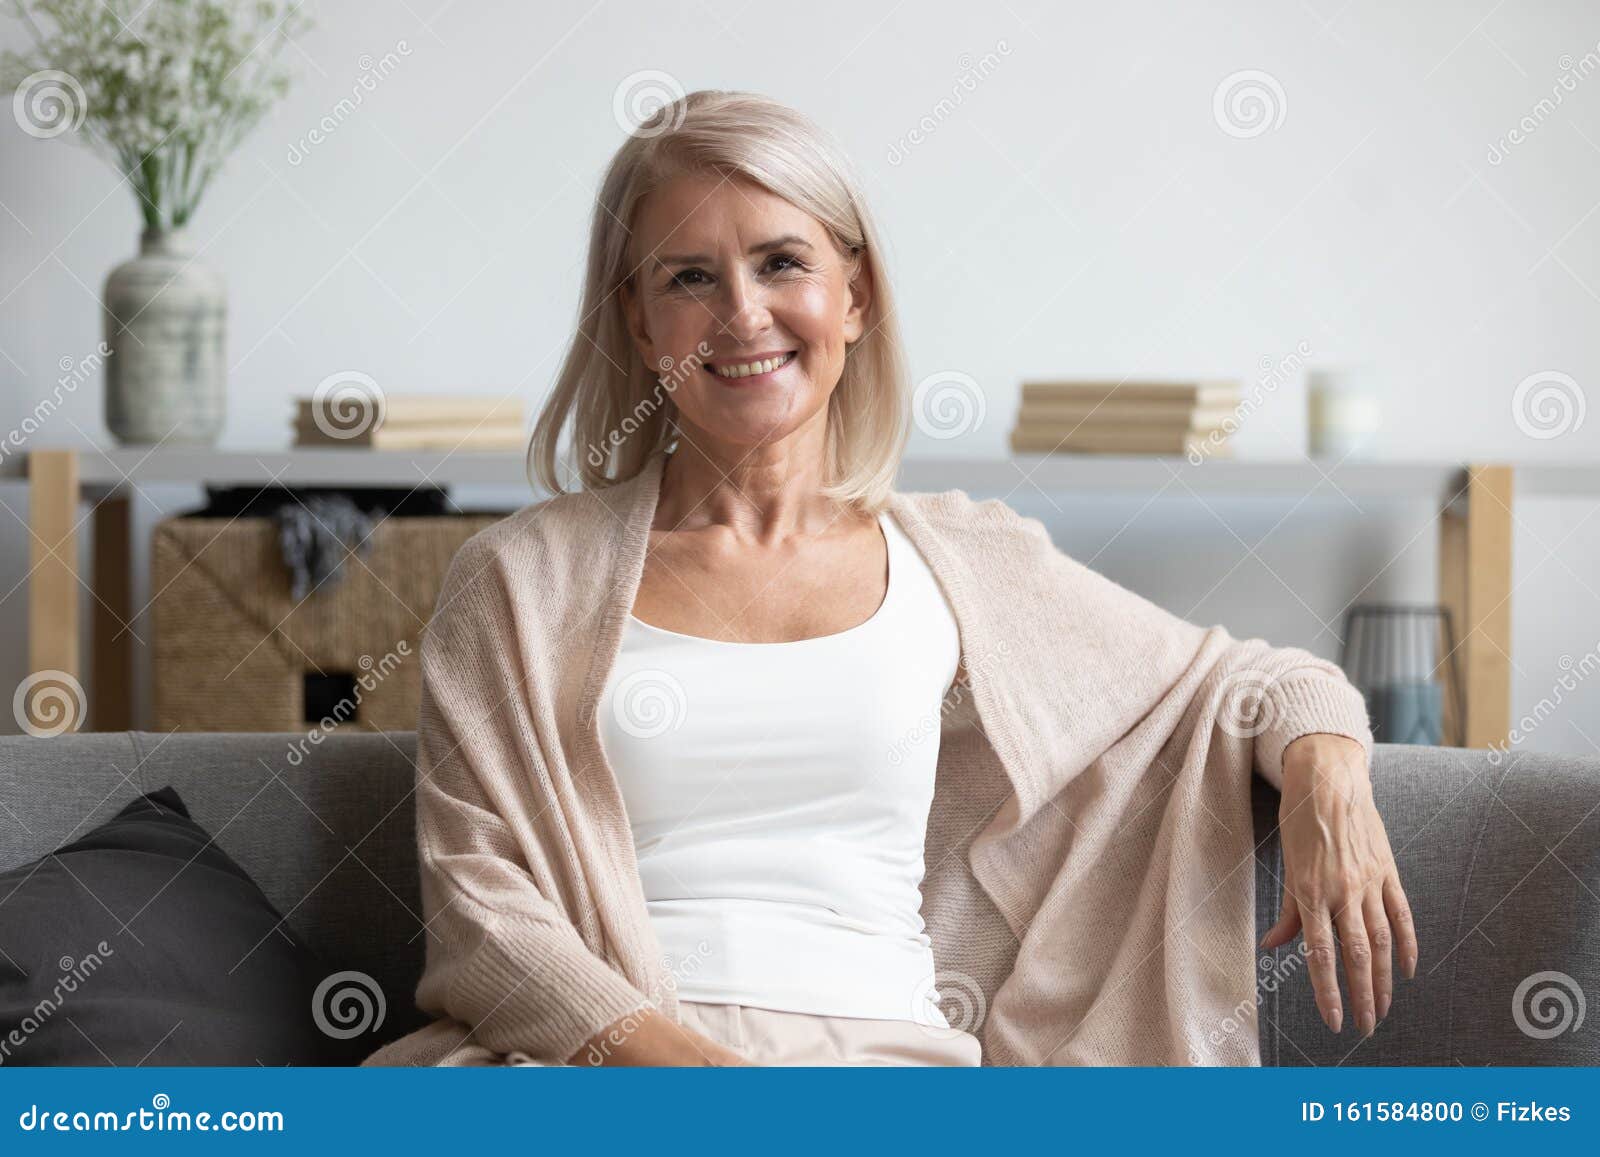 happy middle aged woman looking at camera at home